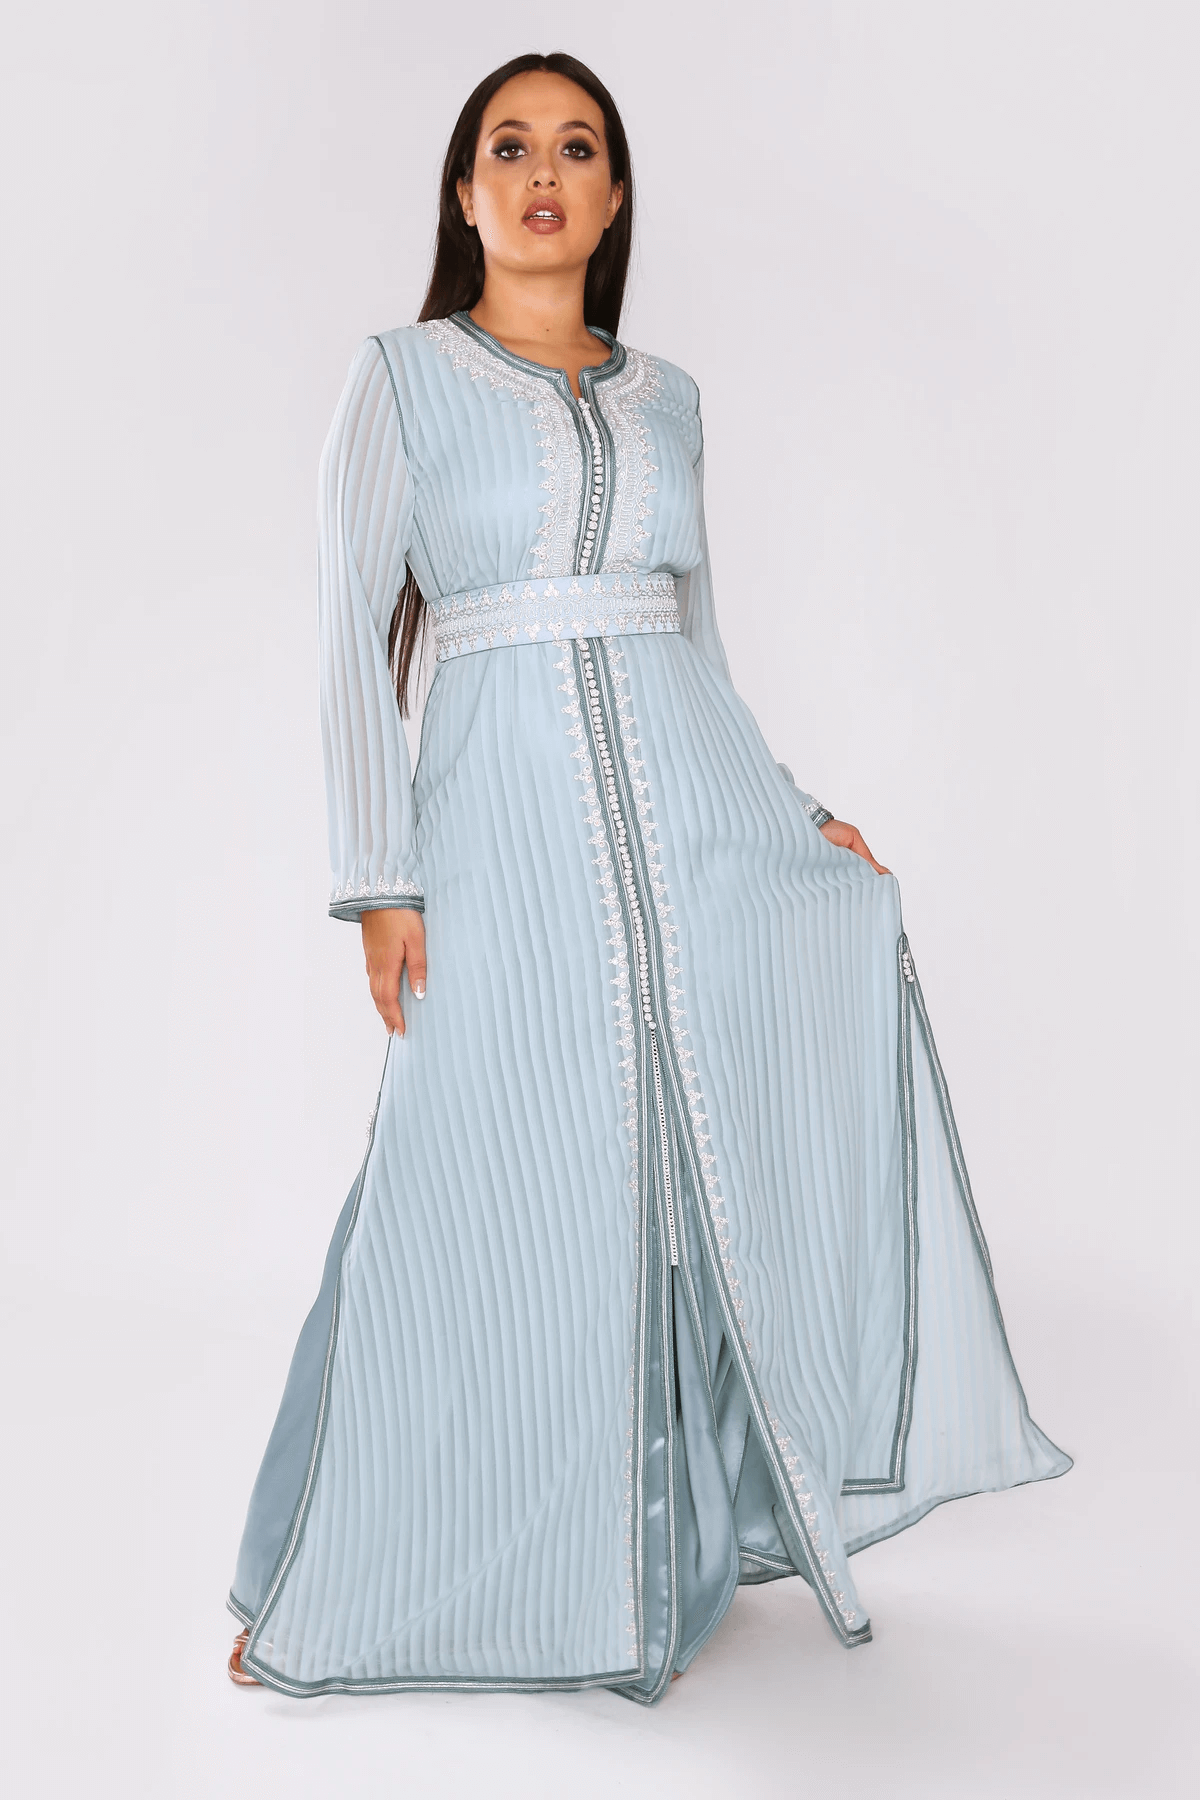 Lebssa Utopia Occasion Wear Formal Layered Maxi Dress and Belt in Striped Blue